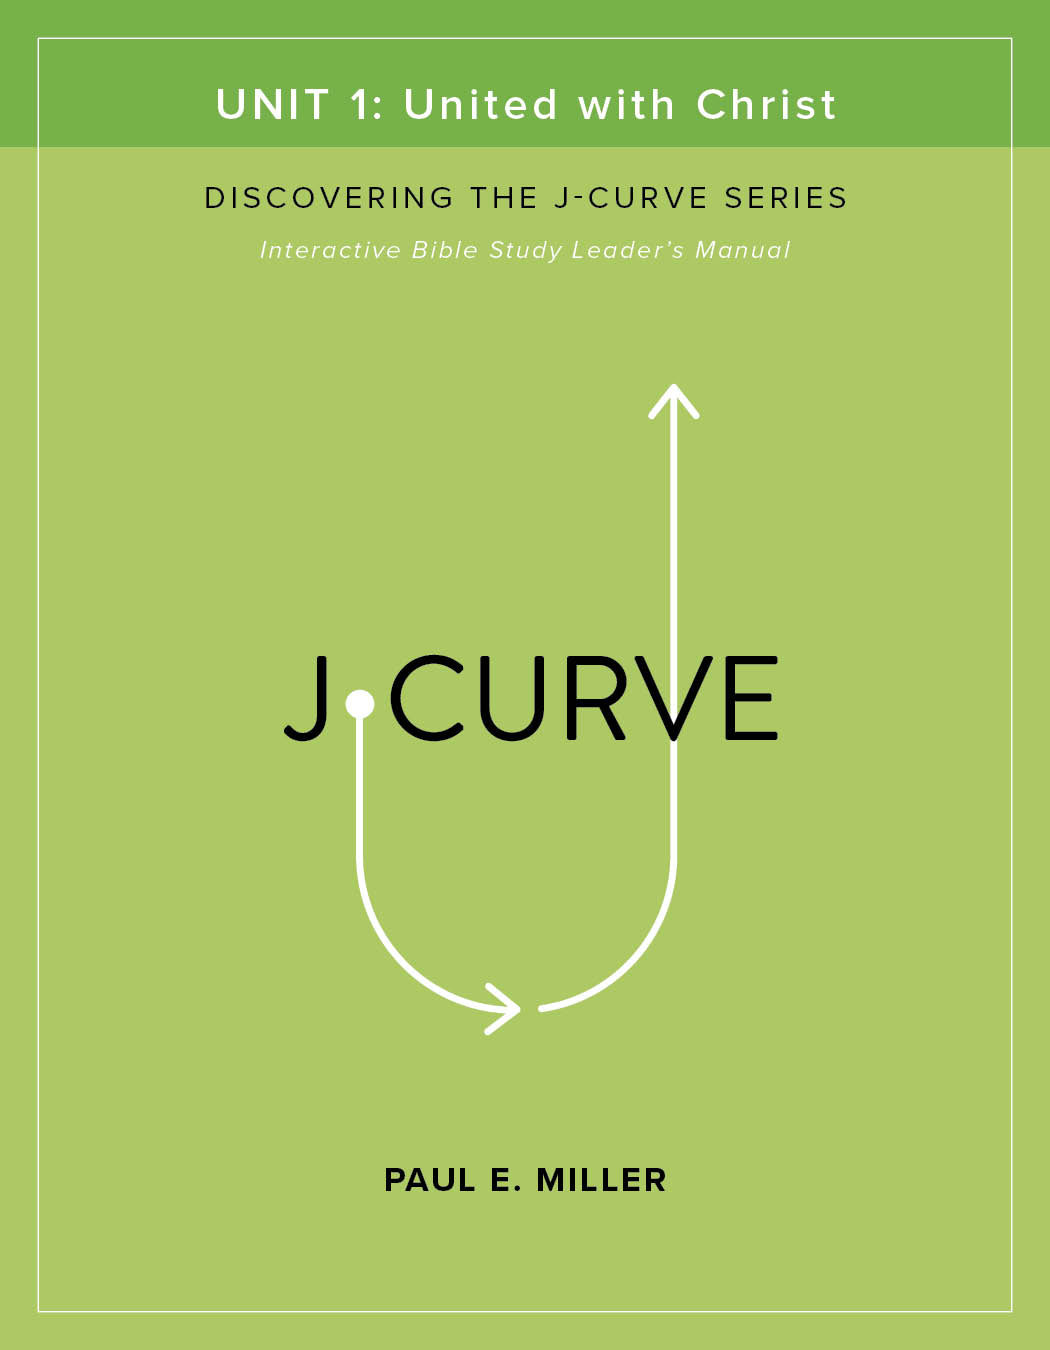 Discovering the J-Curve, Unit 1: United with Christ Leader&